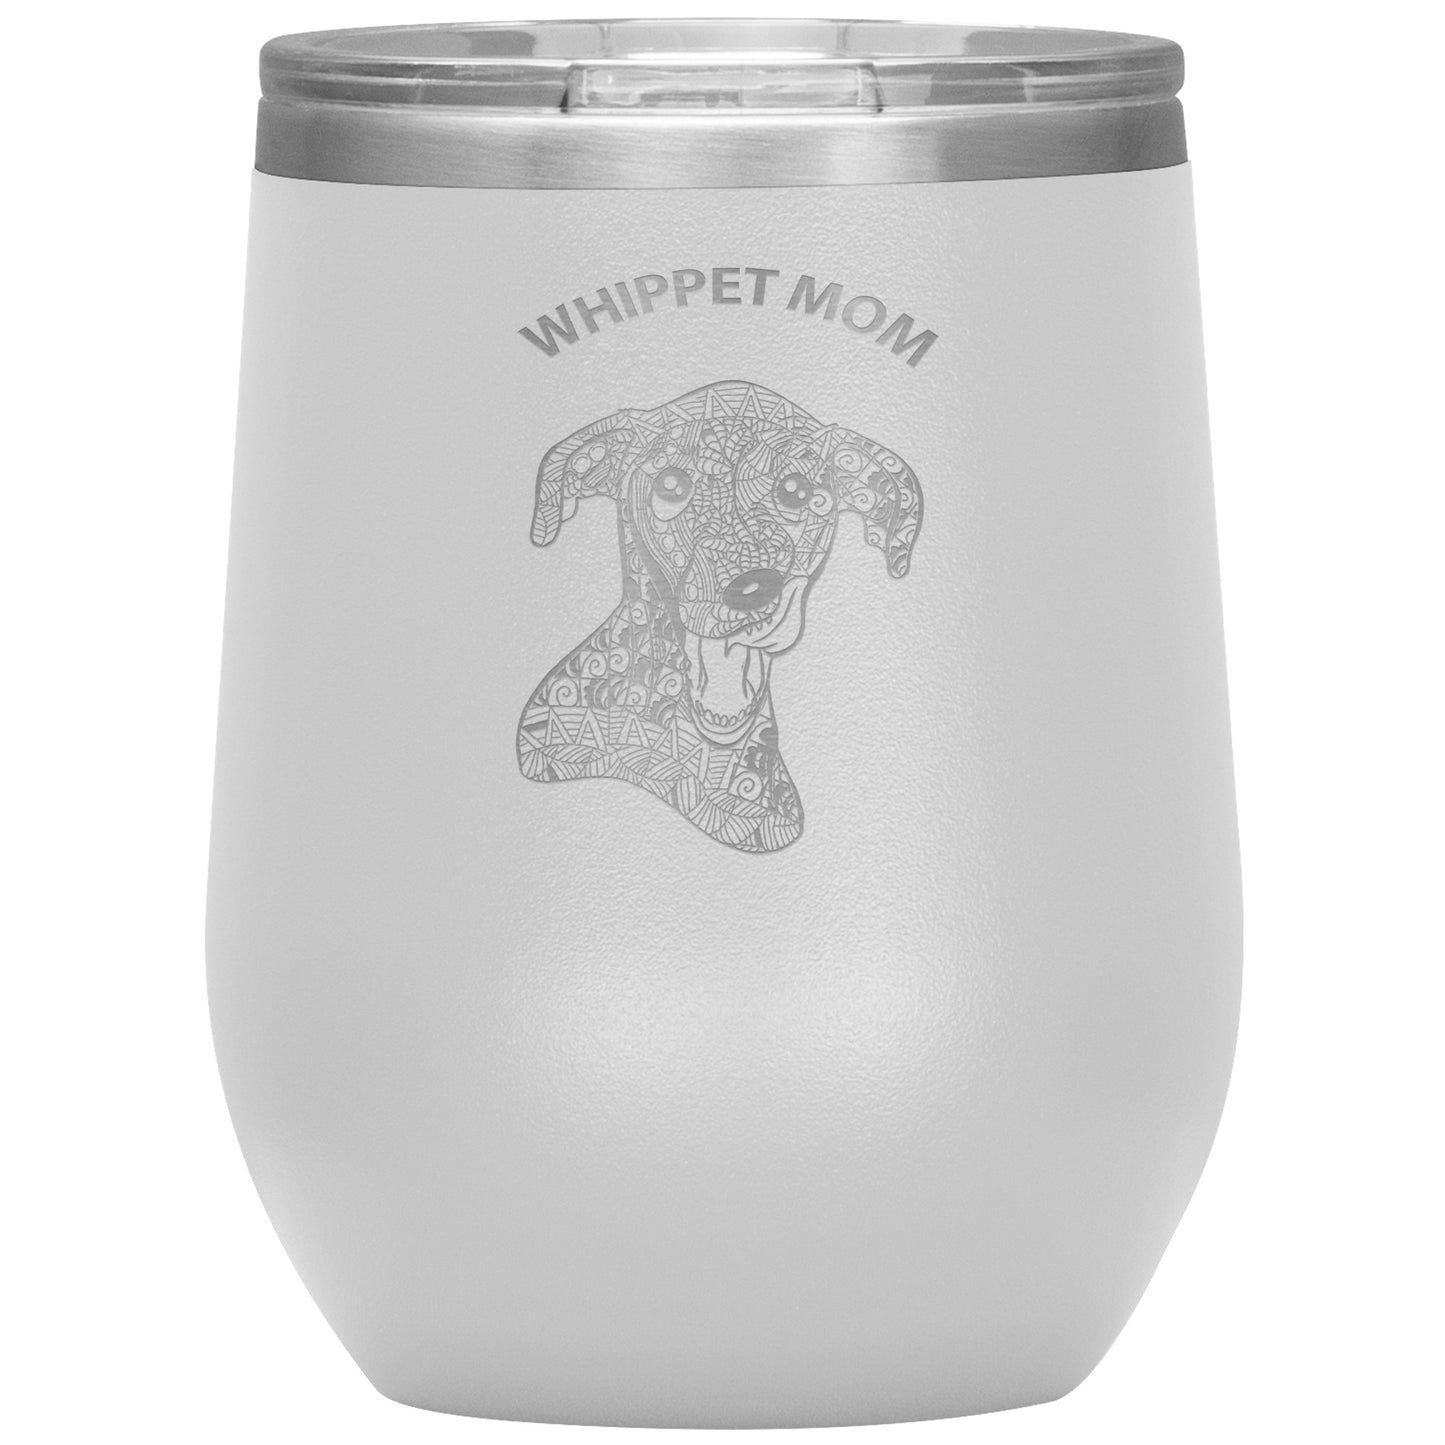 Whippet Mom Design 12oz Insulated Stemless Wine Tumbler - Cindy Sang B&W